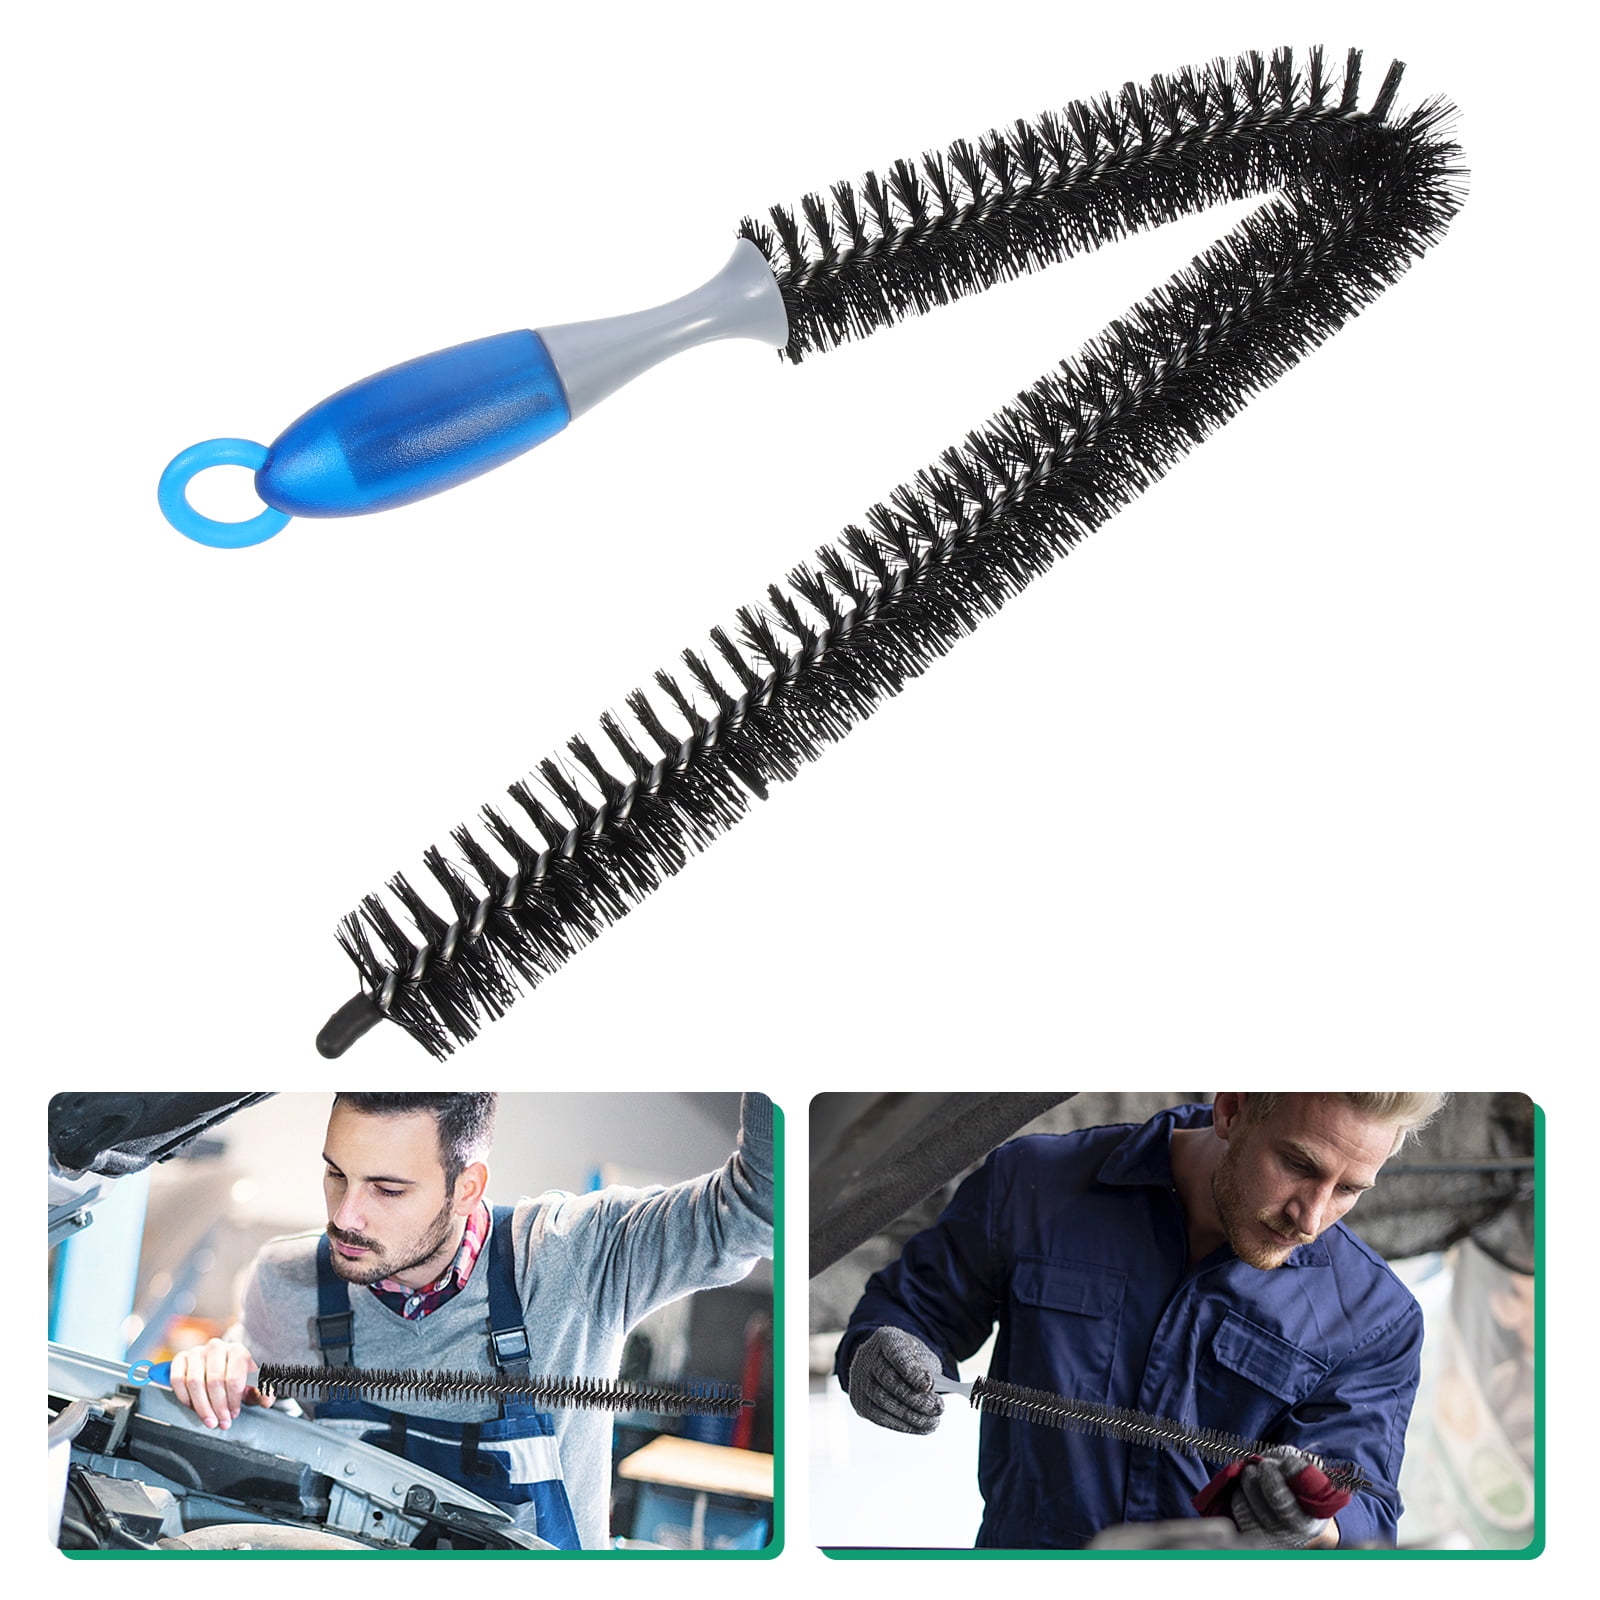 Brush Cleaning Vent Dryer Radiator Cleaner Air Flexible Kit Condenser Coil  Duct Car Me Near Ac Filter Refrigerator